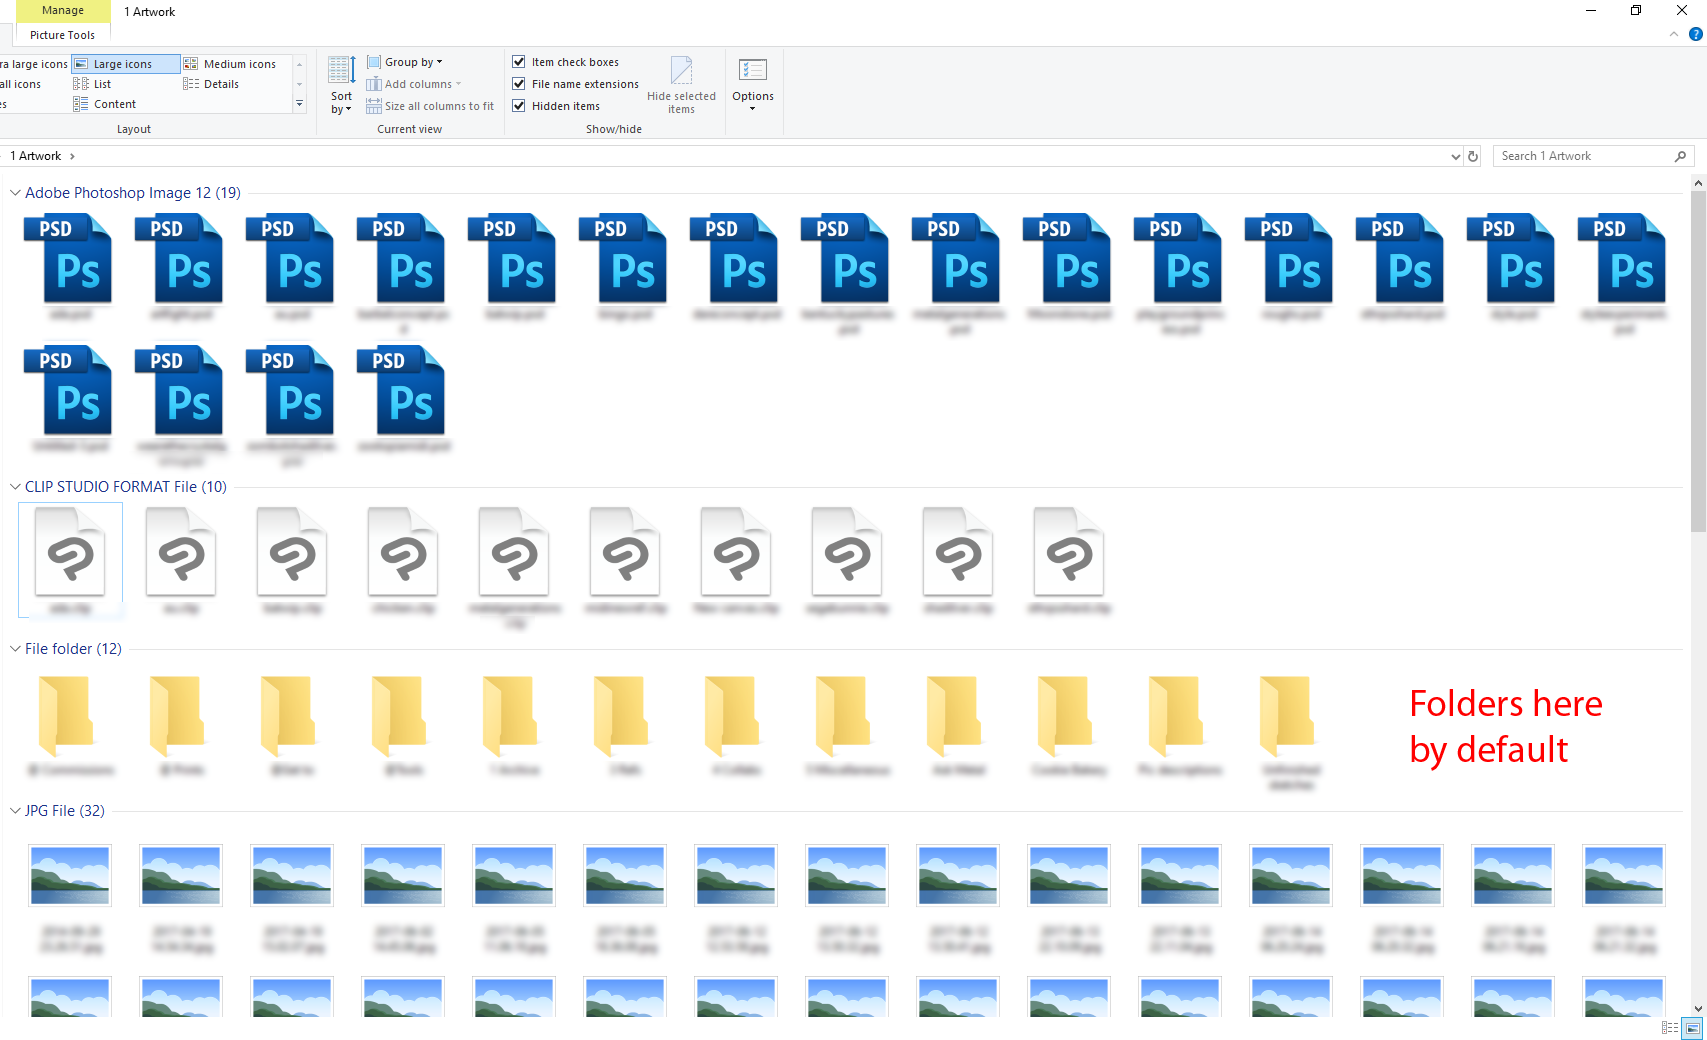 Change folders to be above PSD files in Group By Type? 0cd2d6c3-d211-424d-94ab-80d82fe3770d?upload=true.png